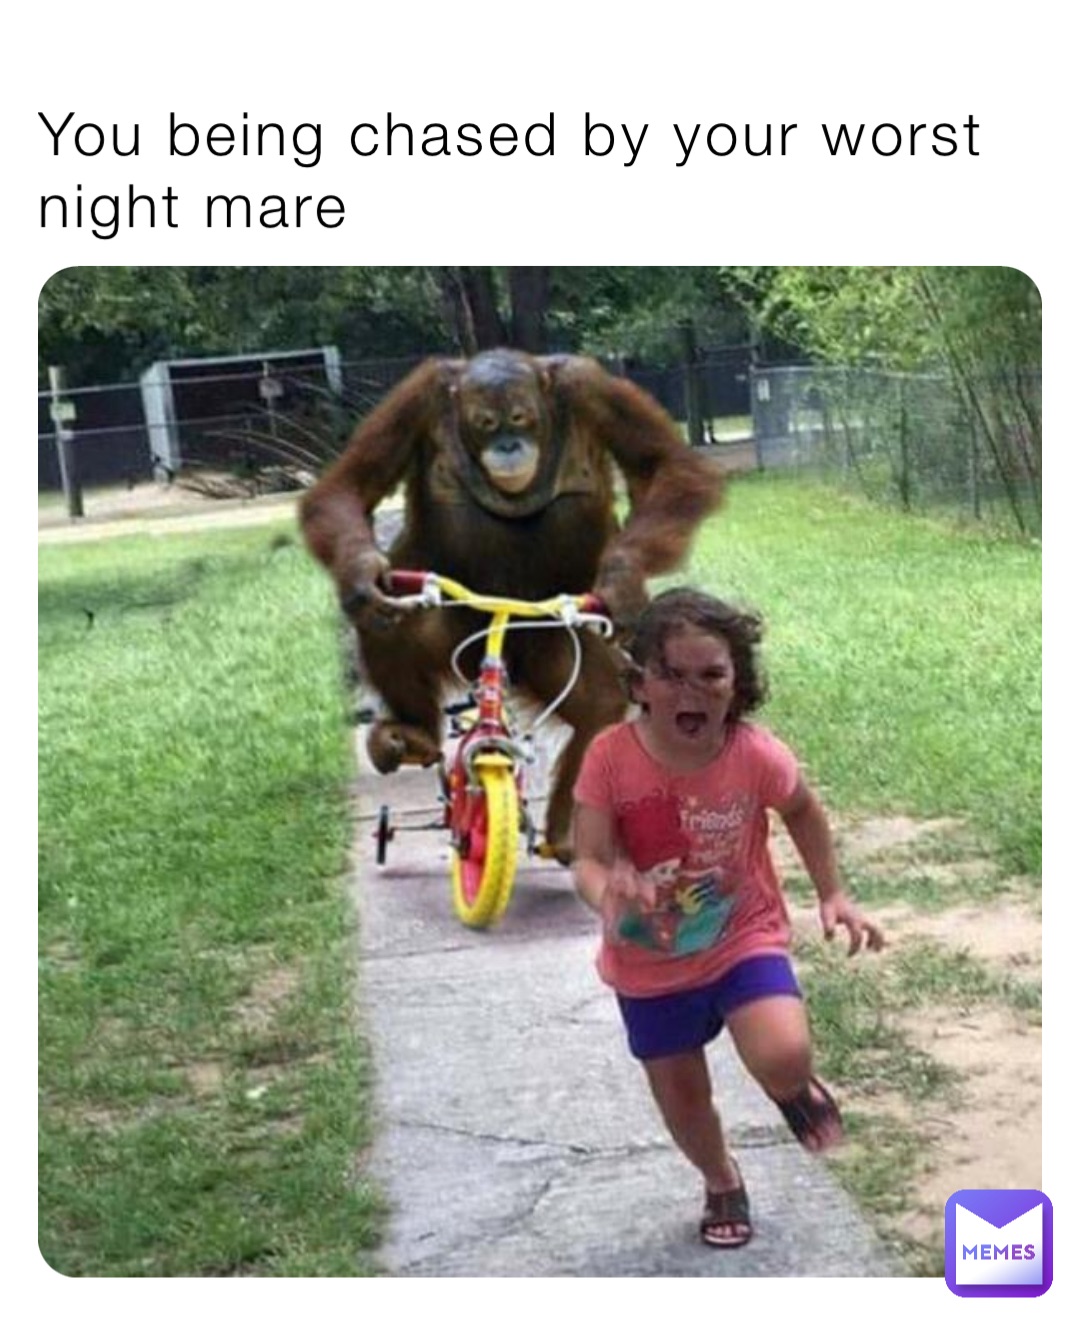 You being chased by your worst night mare